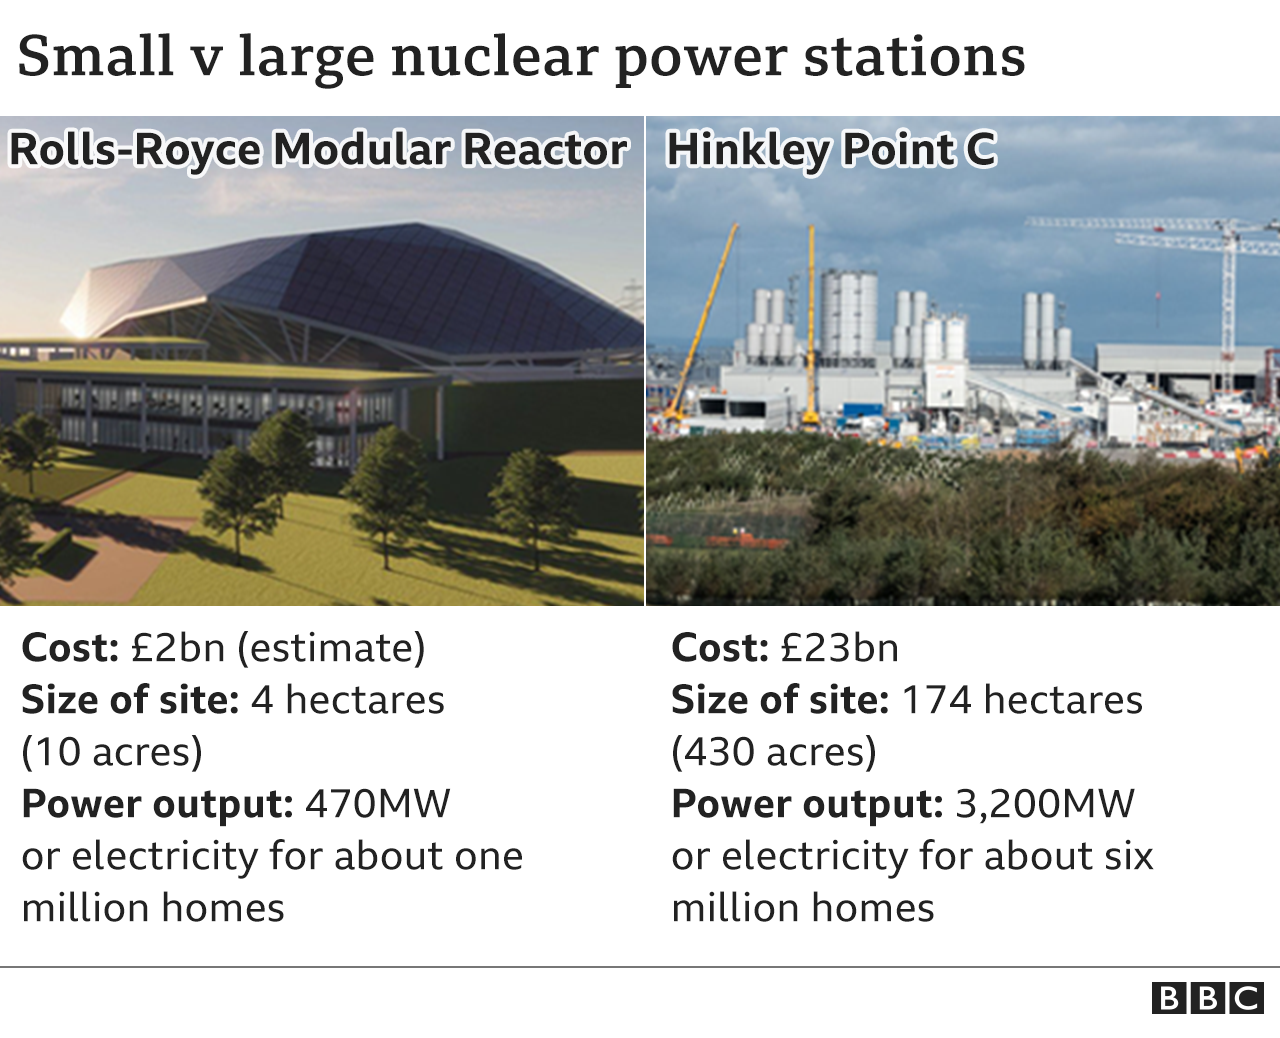 The small nuclear power plants billed as an energy fix